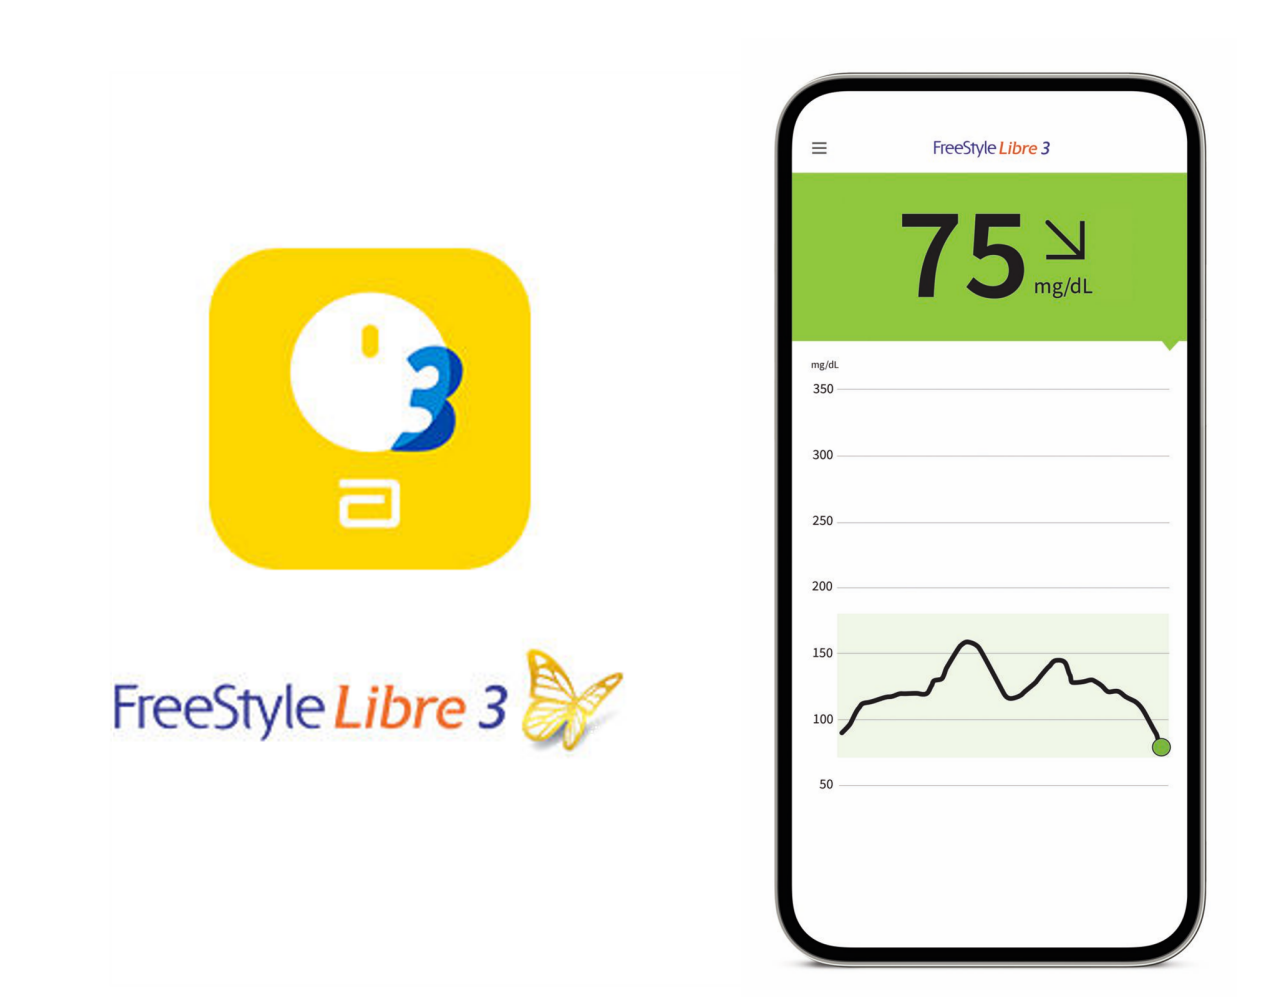 A smartphone showing a screenshot of the FreeStyle Libre 3 app.